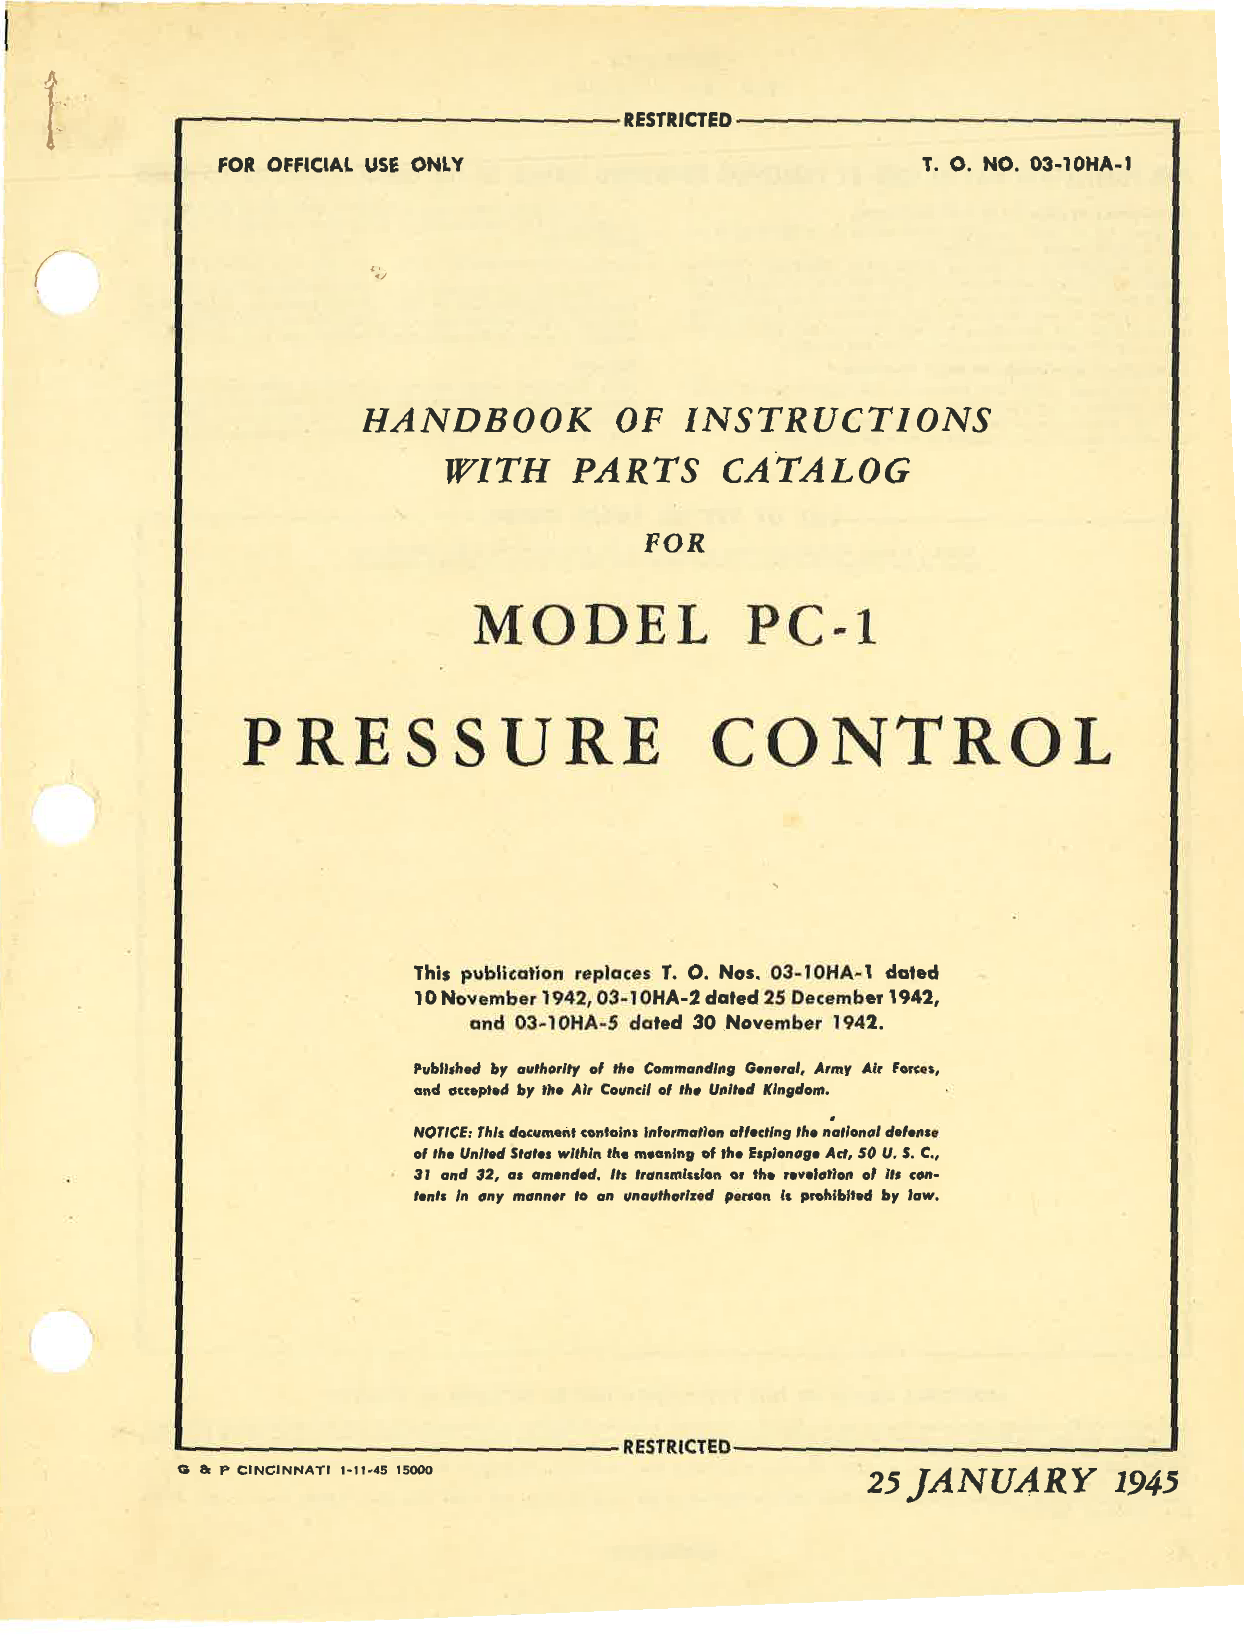 Sample page 1 from AirCorps Library document: Handbook of Instructions with Parts Catalog for Model PC-1 Pressure Control